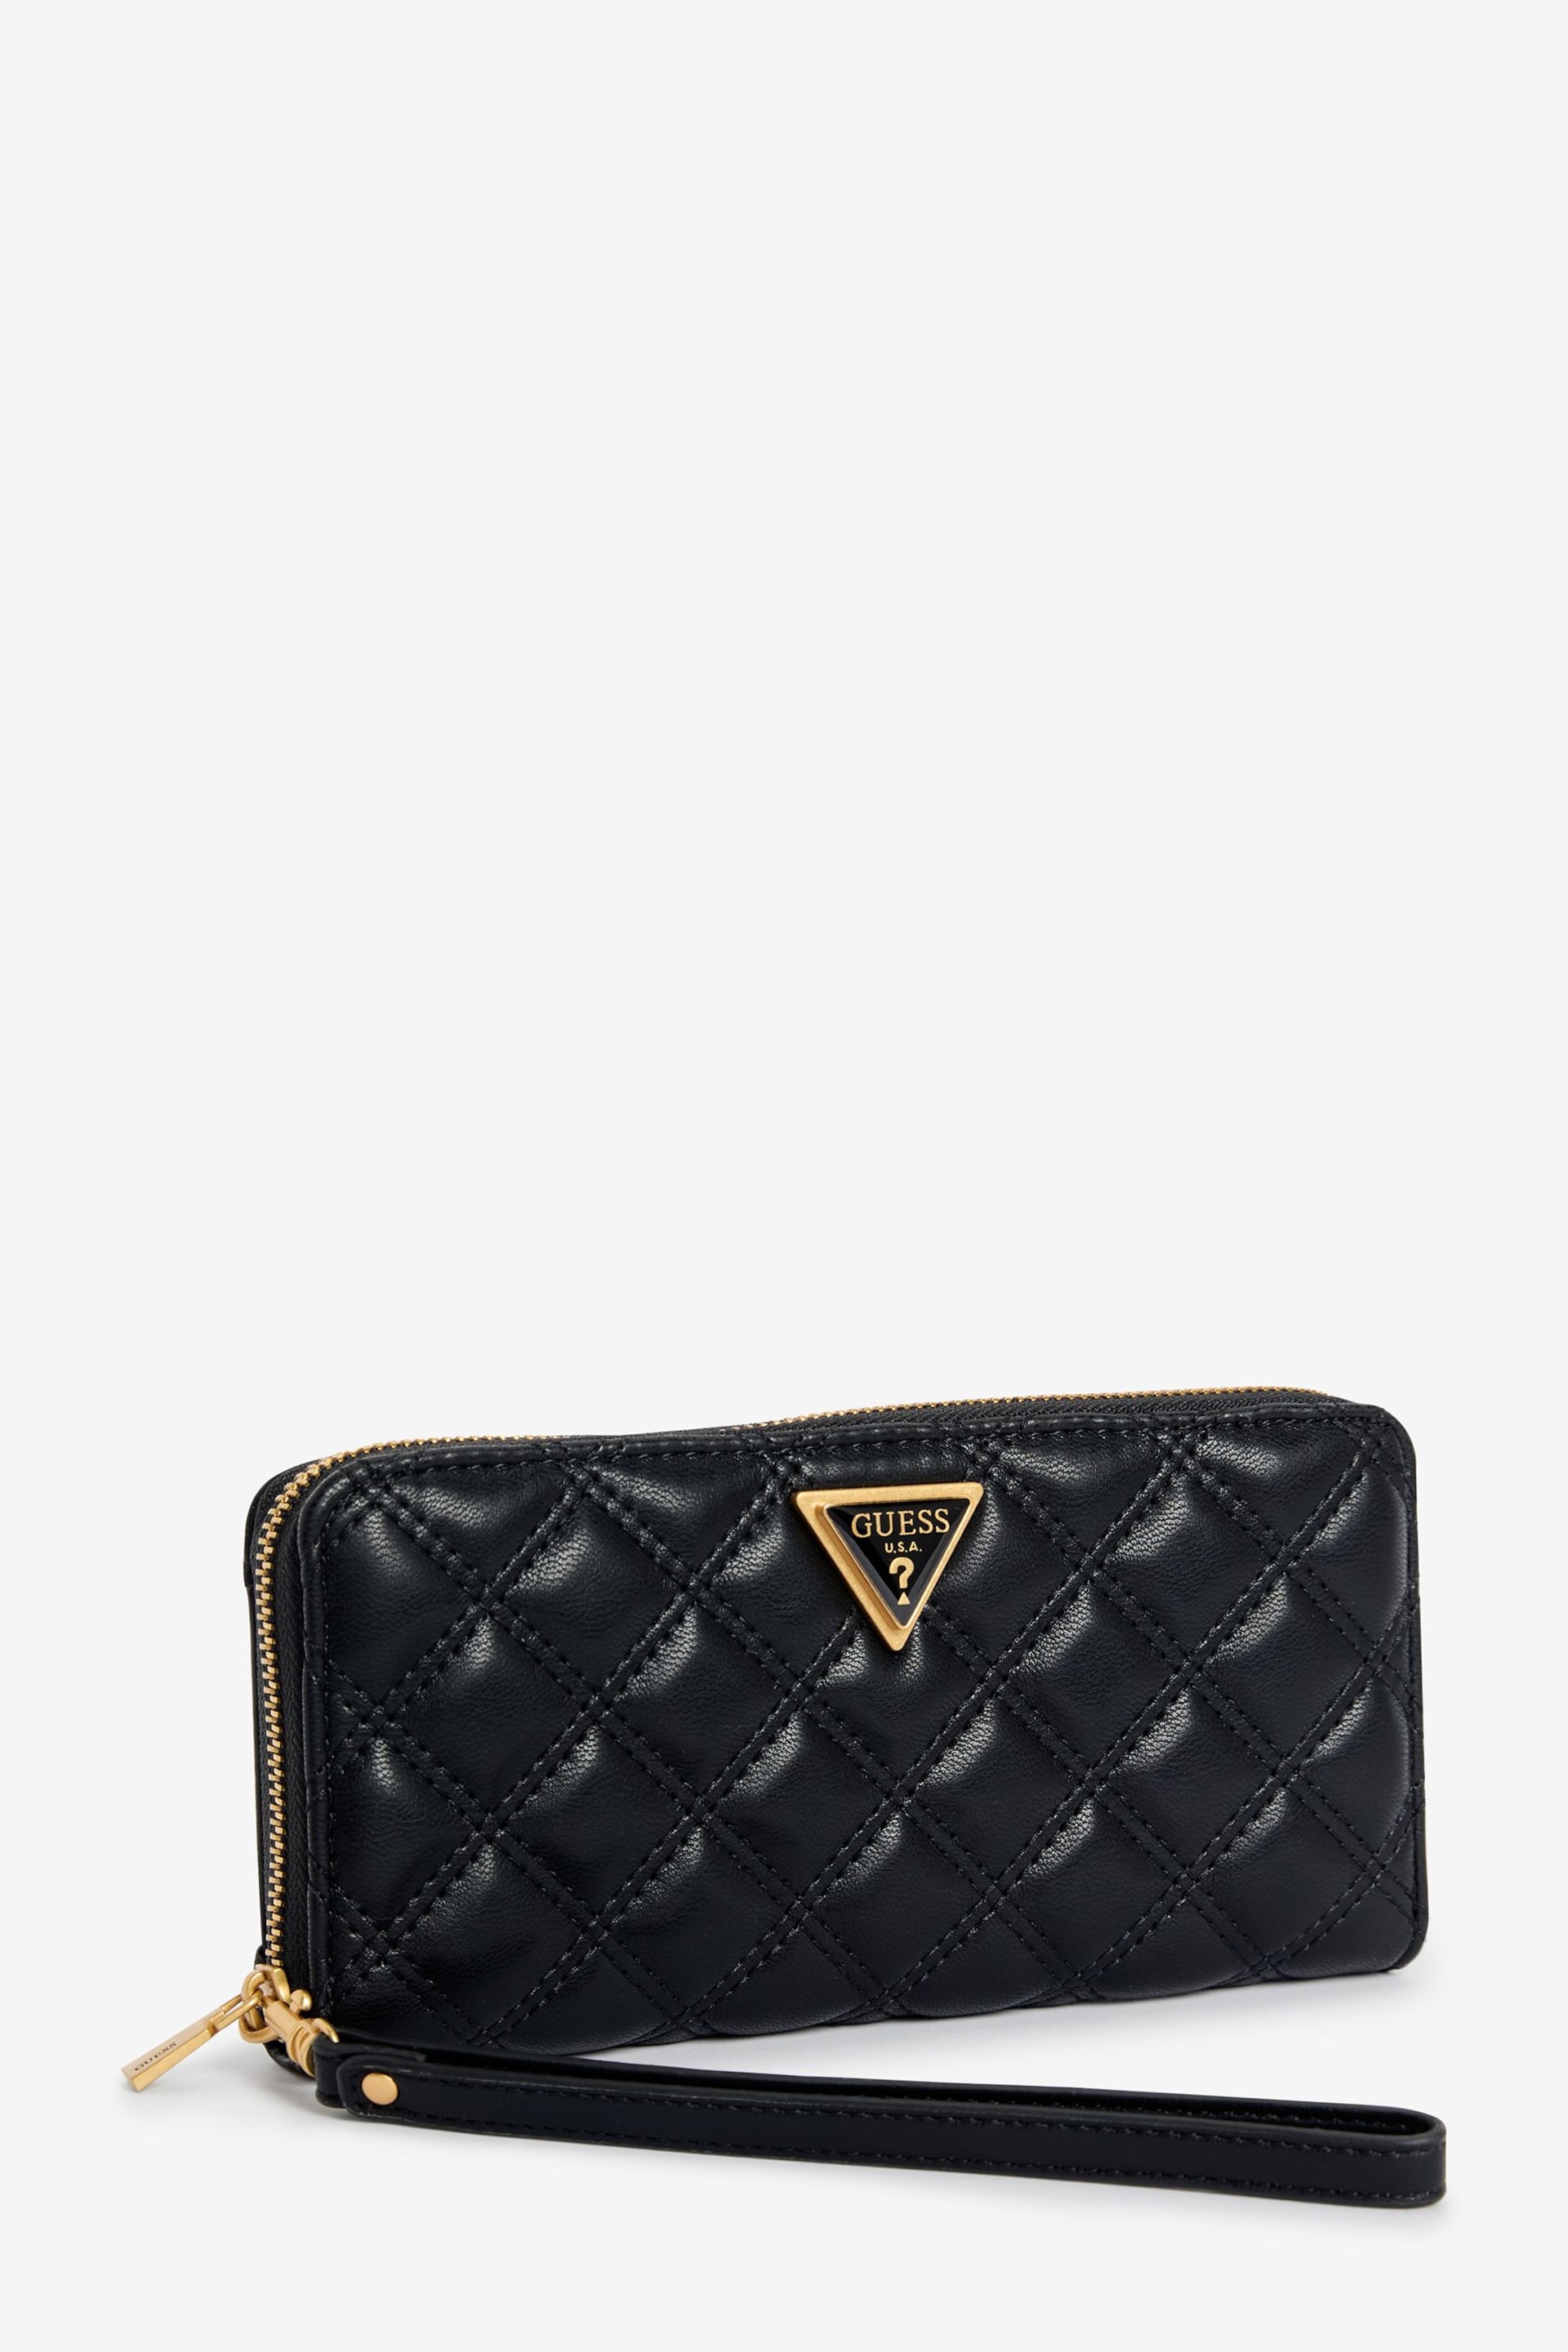 Guess Giully Large Zip Around Purse - Image 1 of 4